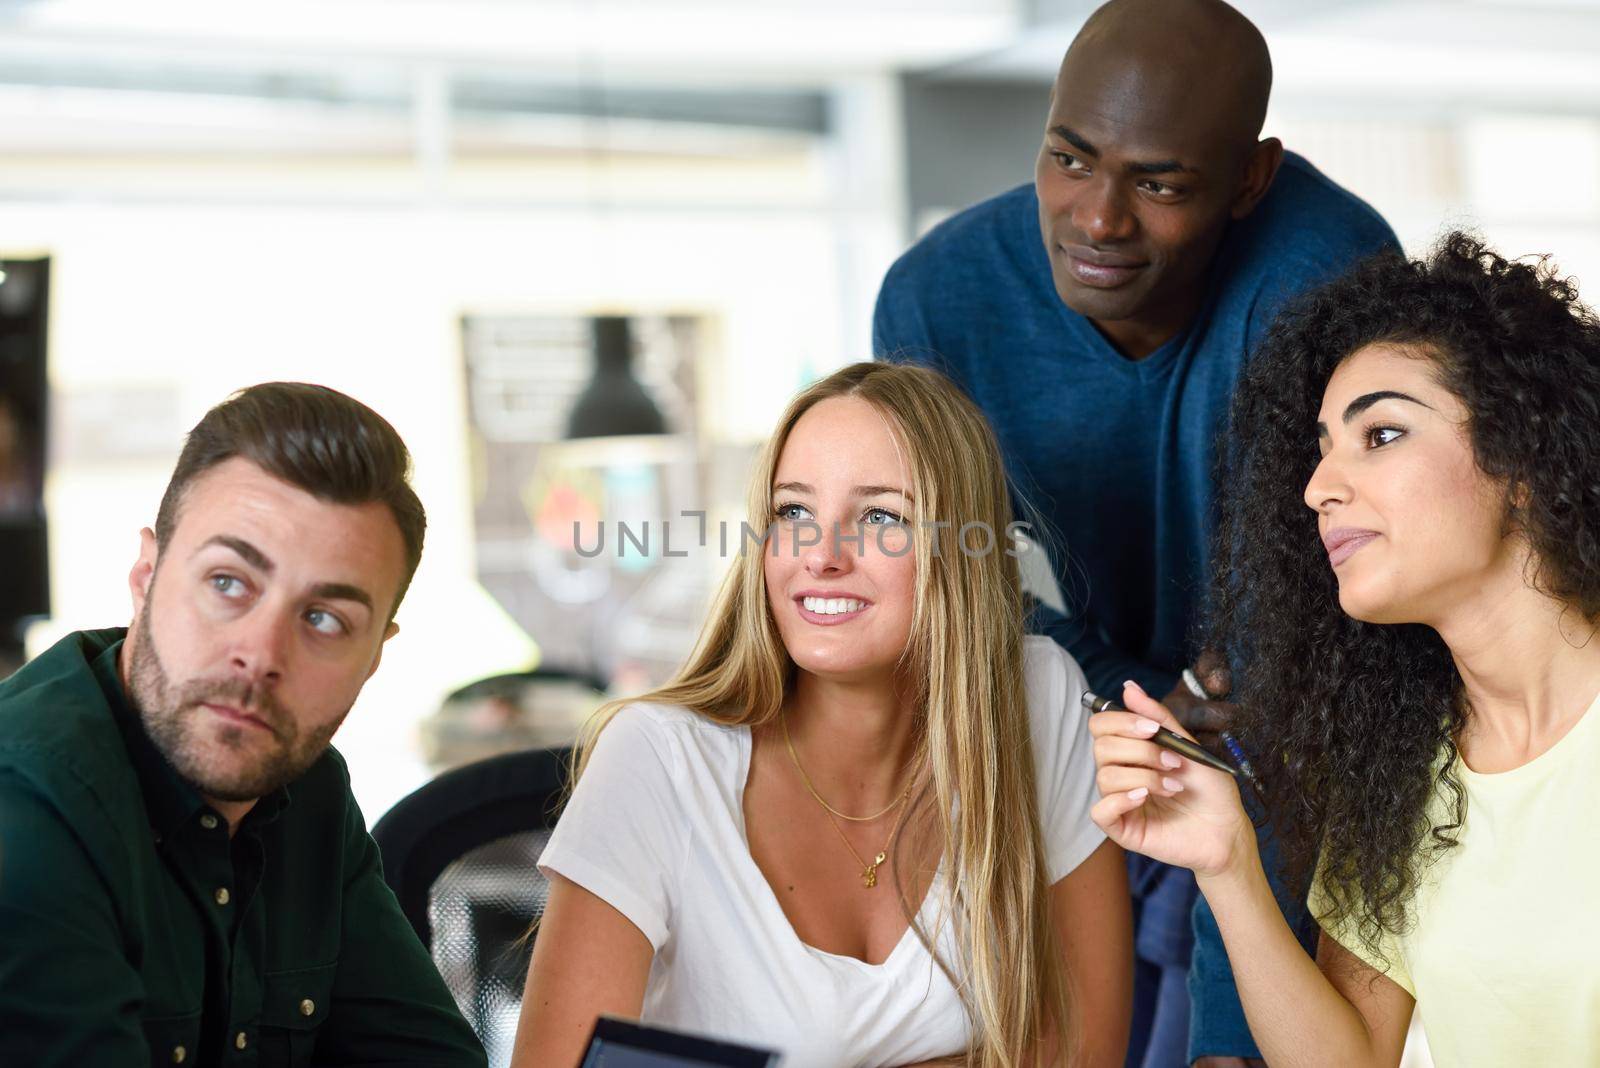 Four young people working together. Beautiful men and women in a business meeting wearing casual clothes. Multi-ethnic group.